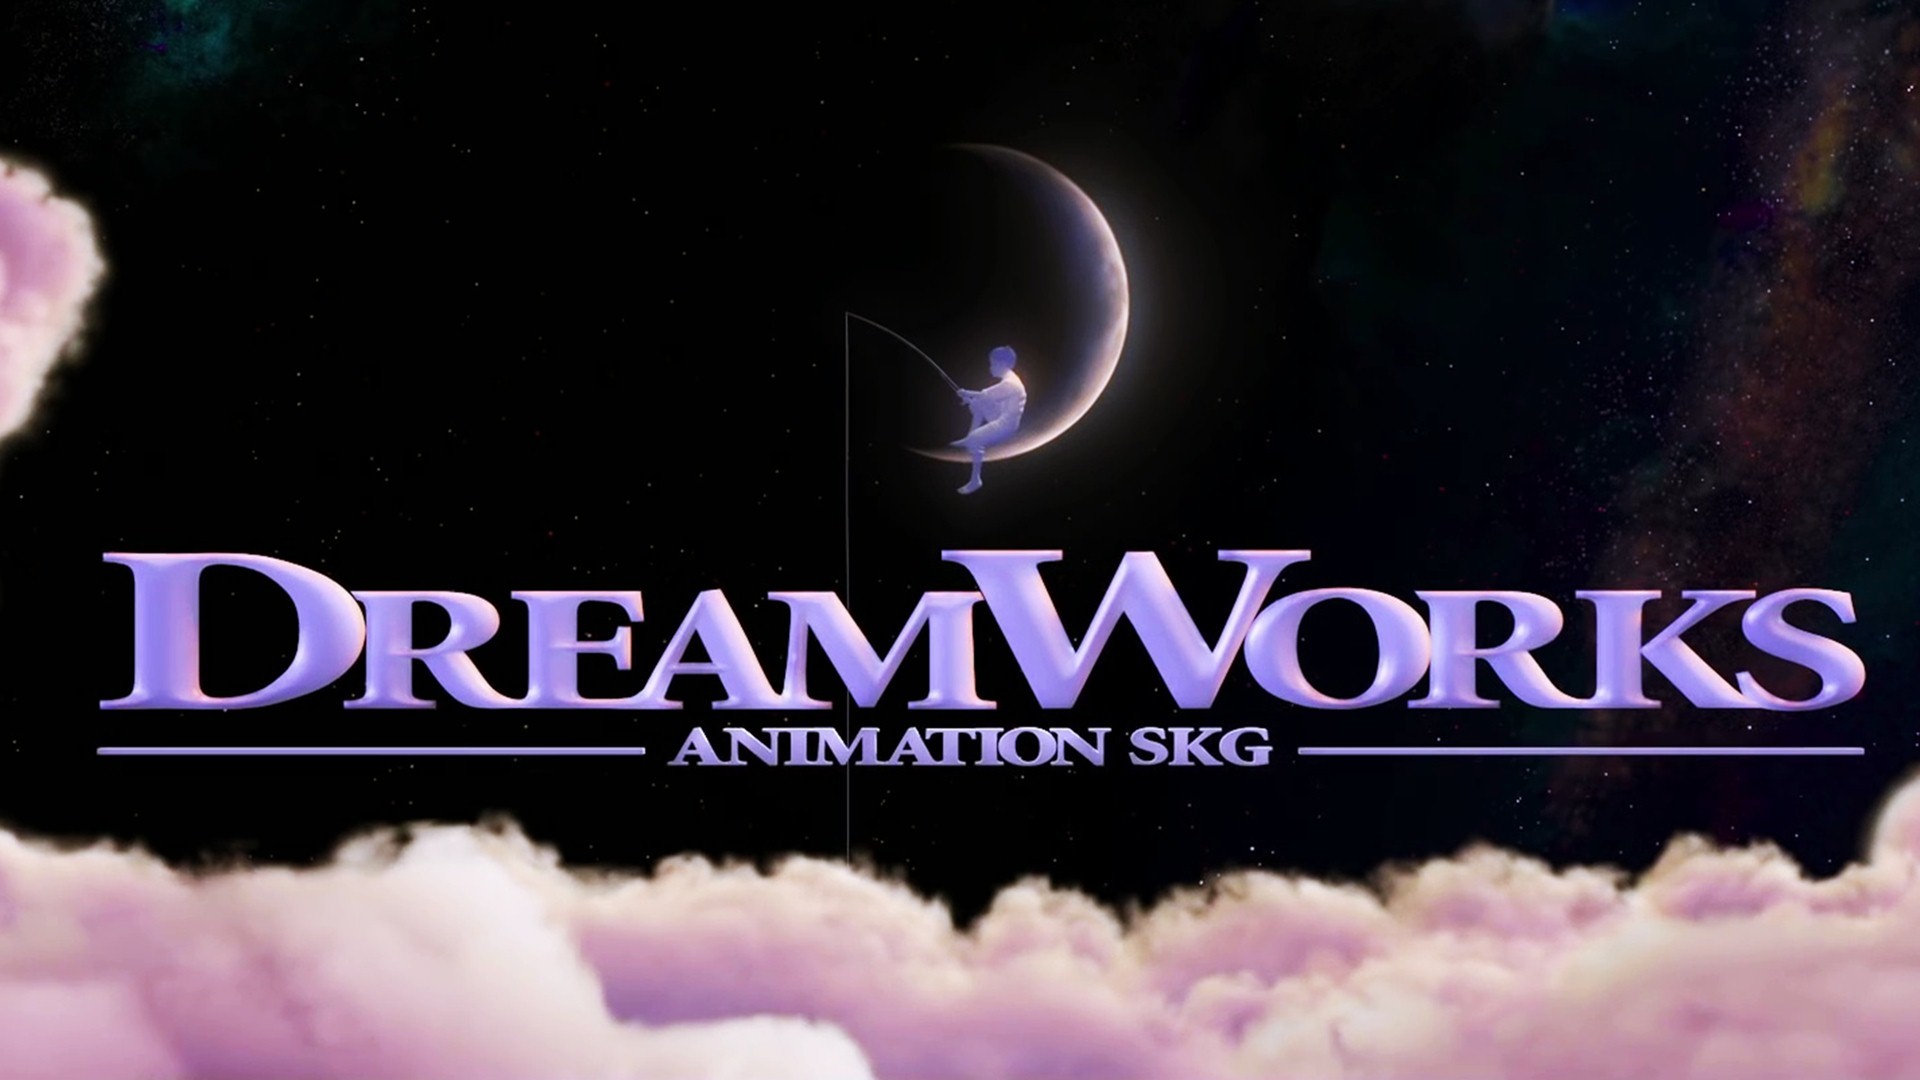 Dreamworks Wallpaper (79+ pictures)